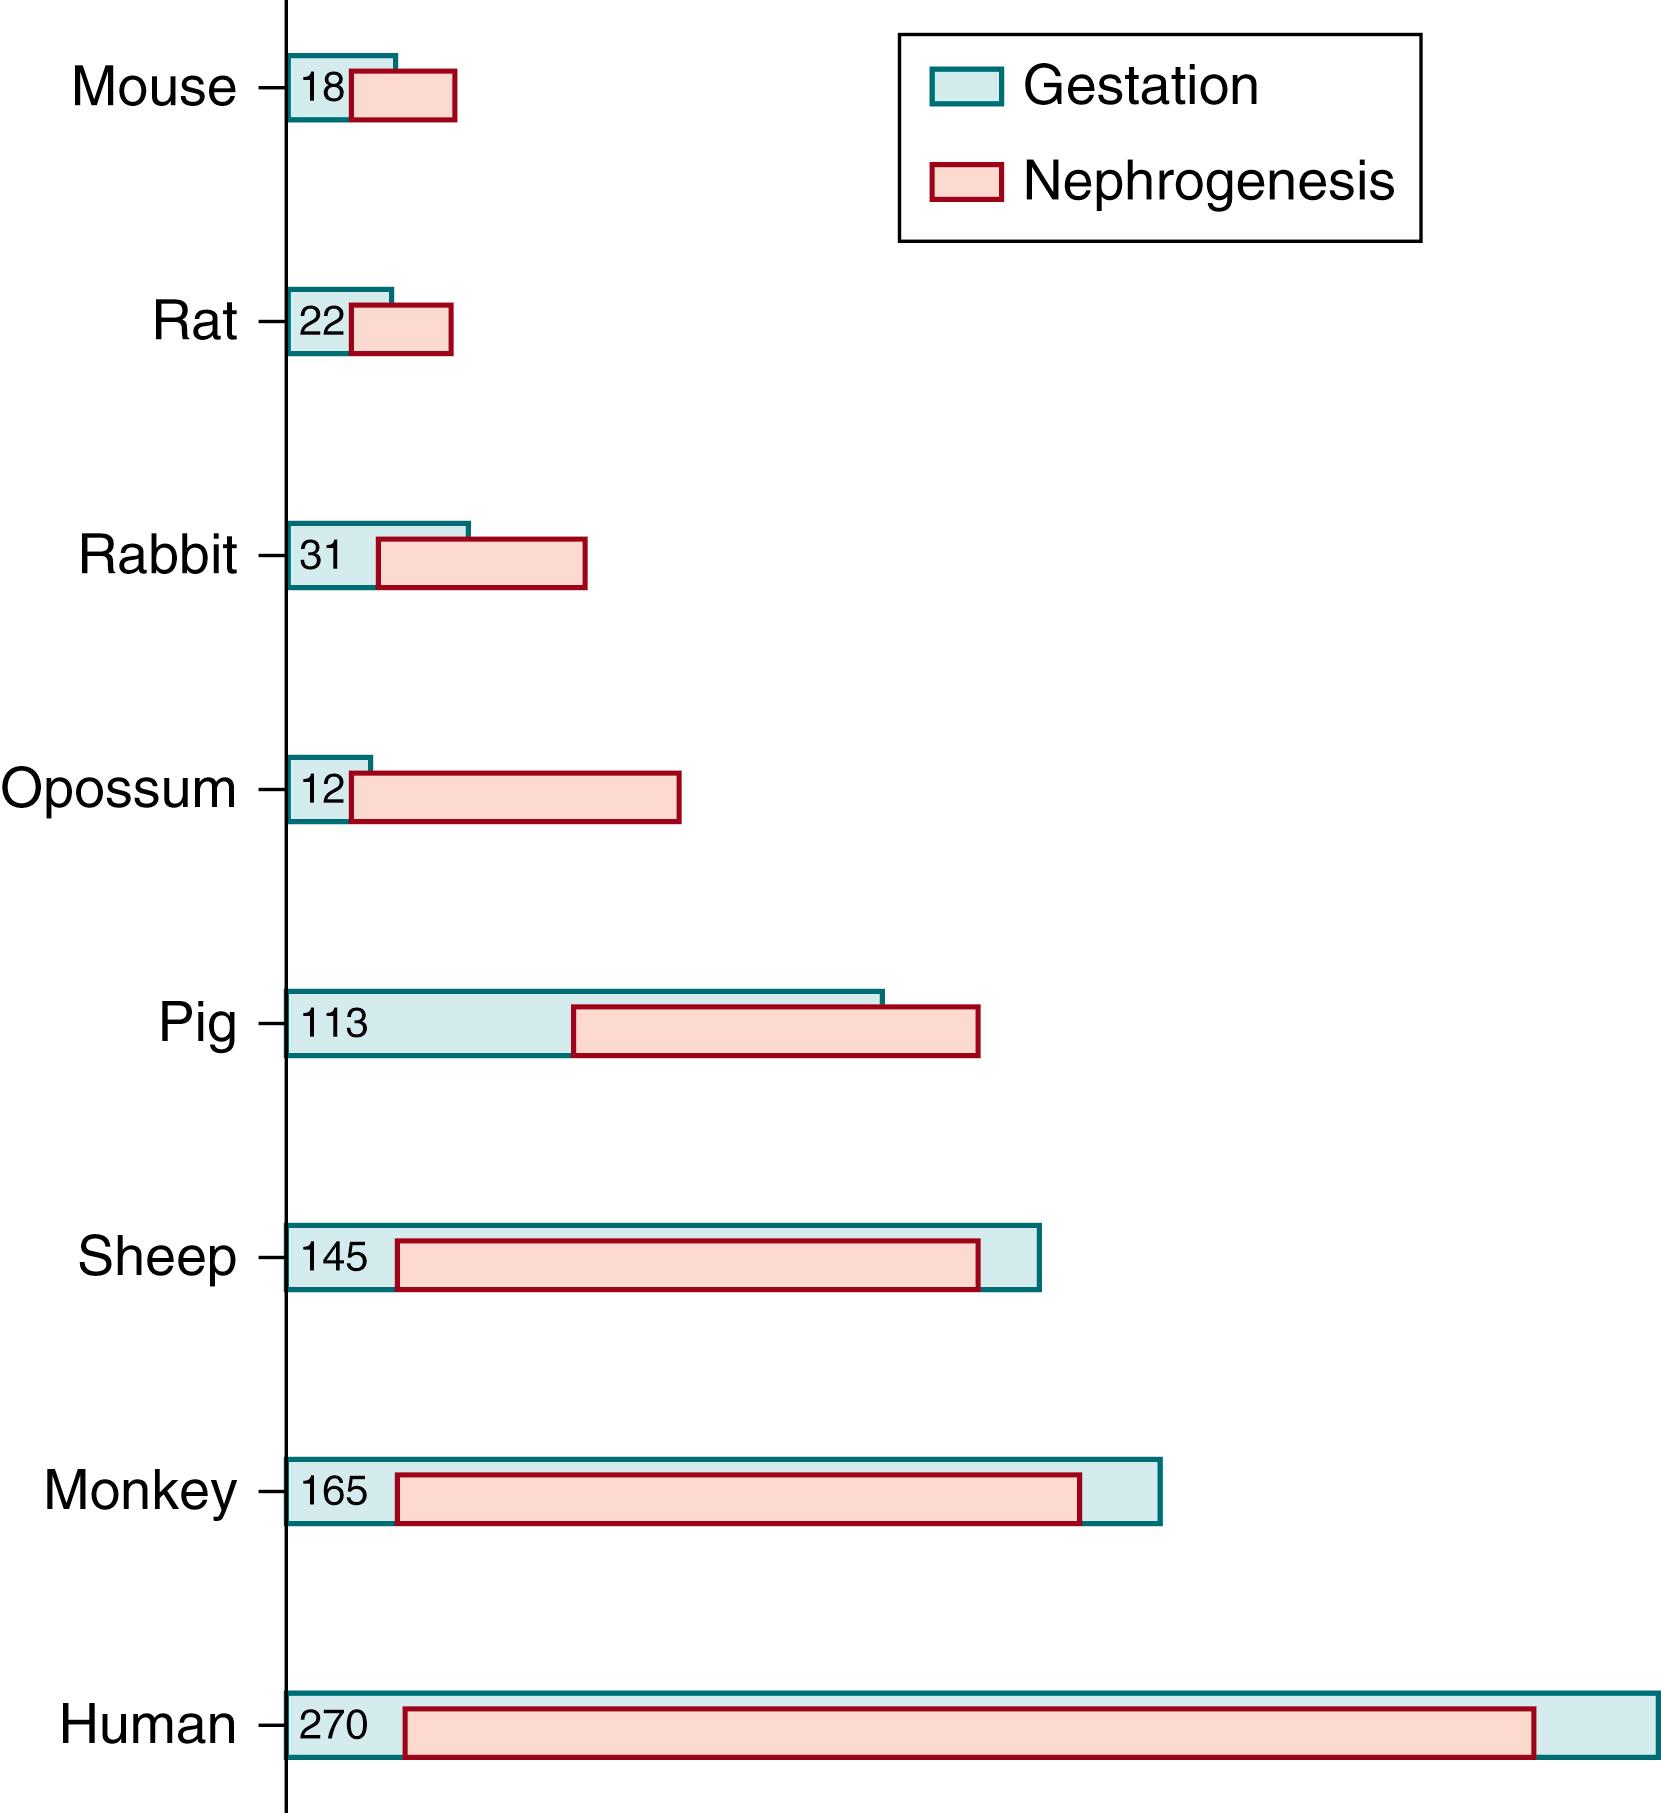 Fig. 94.1, Mammalian nephrogenesis. Schematic representation of the relative lengths of nephrogenesis in different mammalian species compared to the duration of their respective gestational period. In certain species, including the mouse, rat, rabbit, and pig, nephrogenesis continues into the postnatal period. Numbers in the green boxes indicate length of gestation in days.